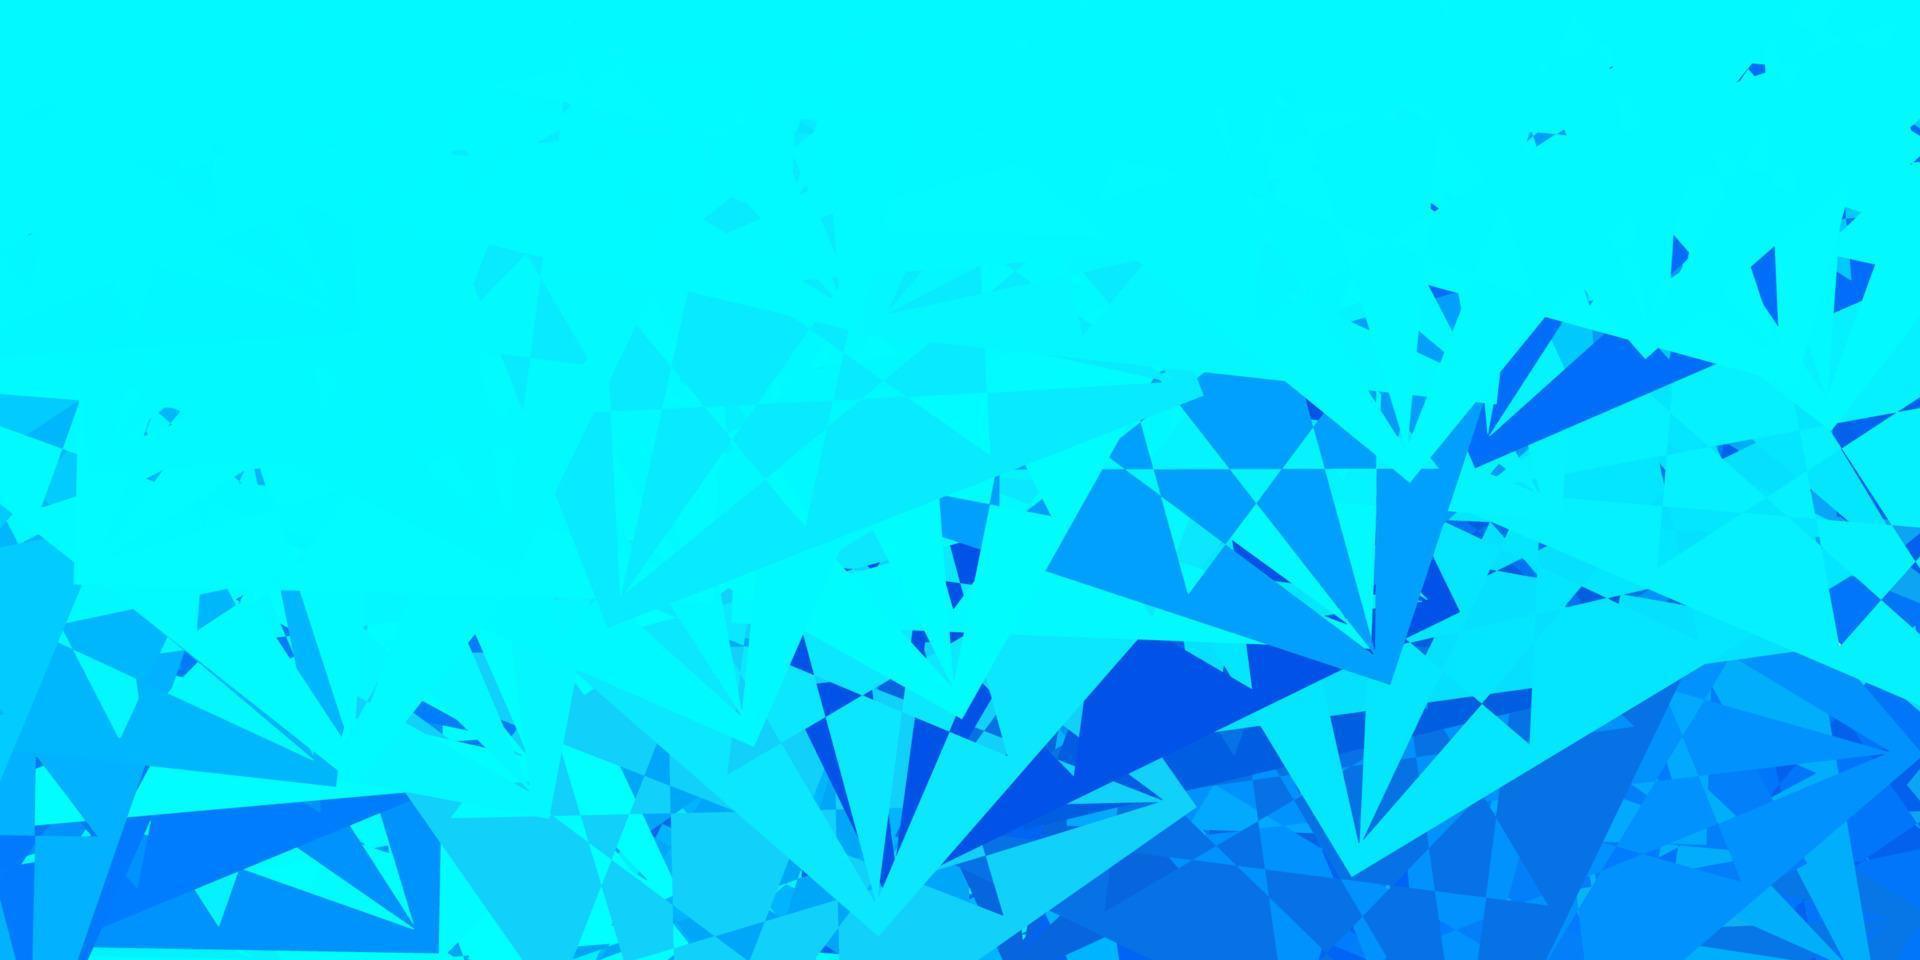 Light BLUE vector template with triangle shapes.